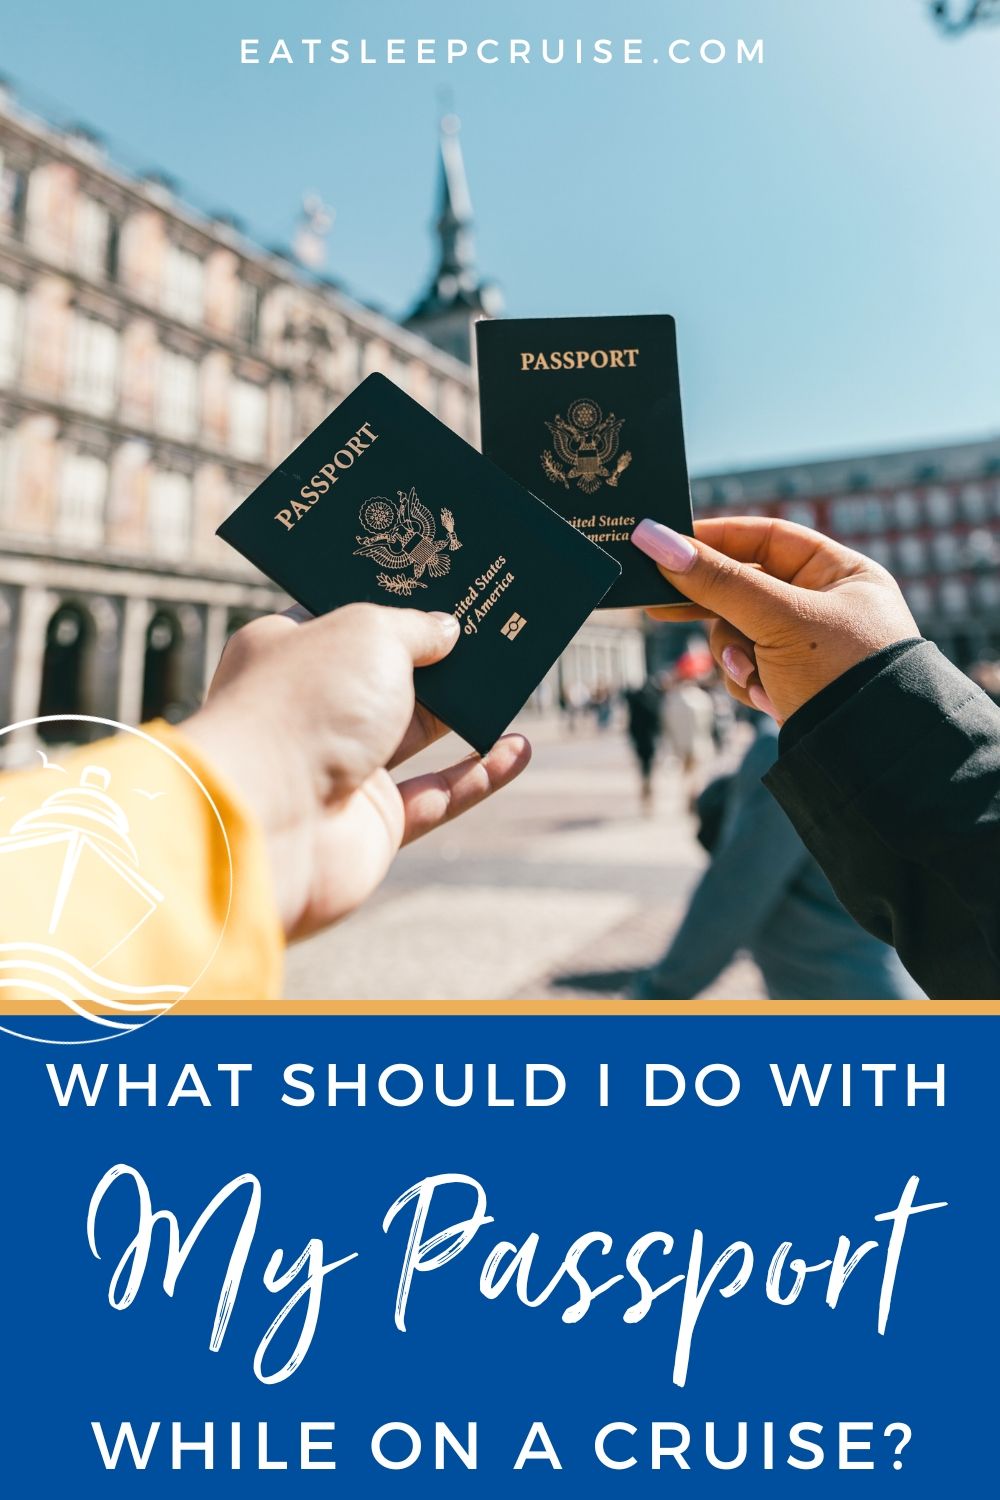 What Should I Do With My Passport on a Cruise?